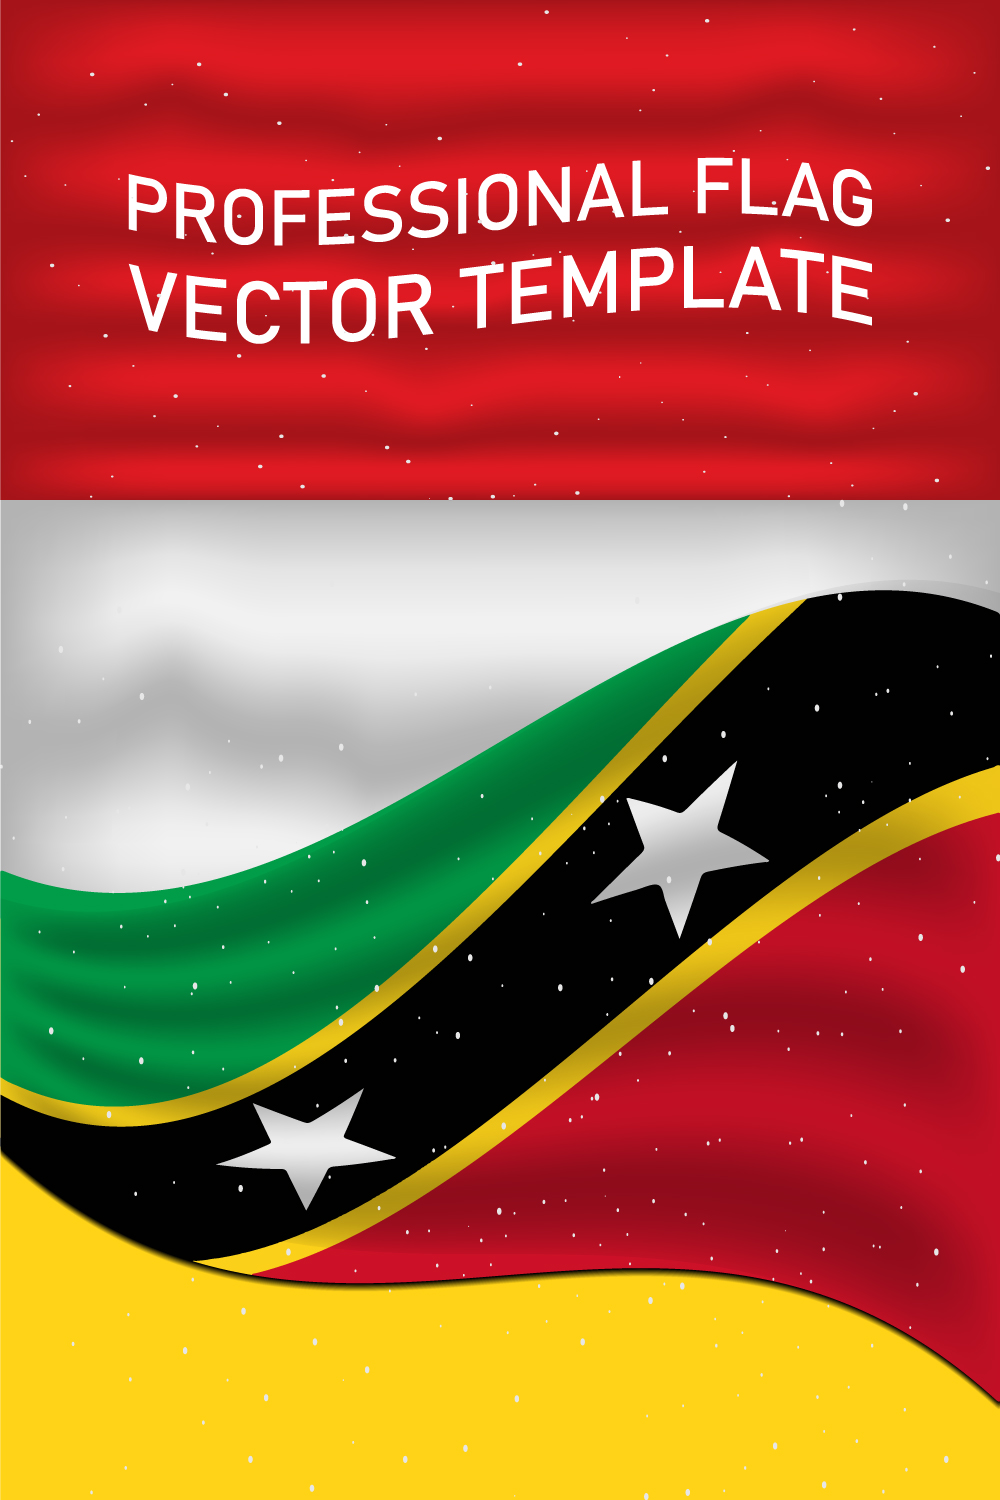 Adorable image of Saint Kitts and Nevis flag.